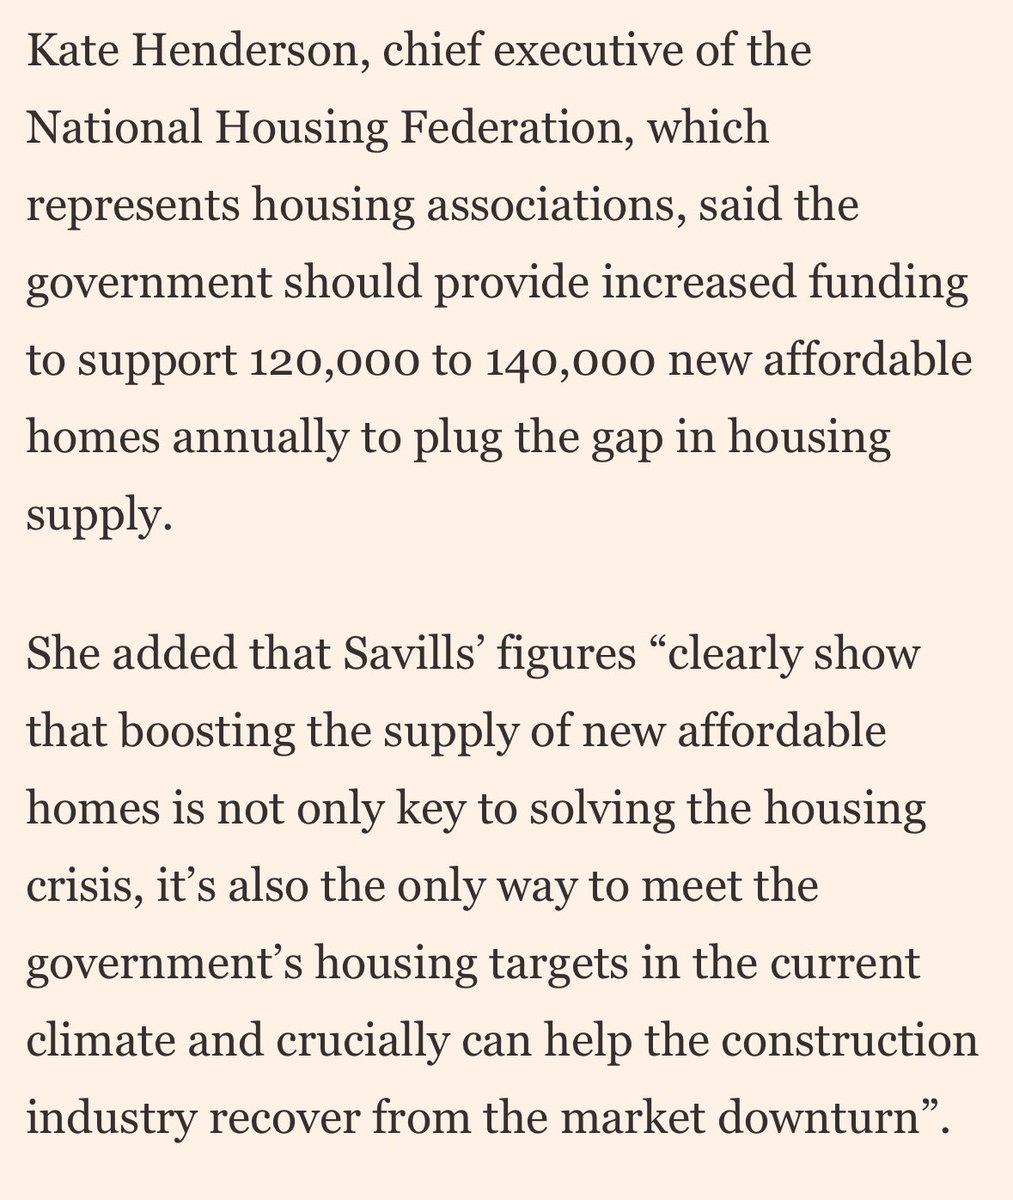 Two stories from NHF over the weekend. Lab and Cons want to see 300,000 new homes a year. Our research with Savills predicts we’ll be down to 160,000 next year. How to get numbers up? The next government needs a major social housing programme. ft.com/content/6f0ace…